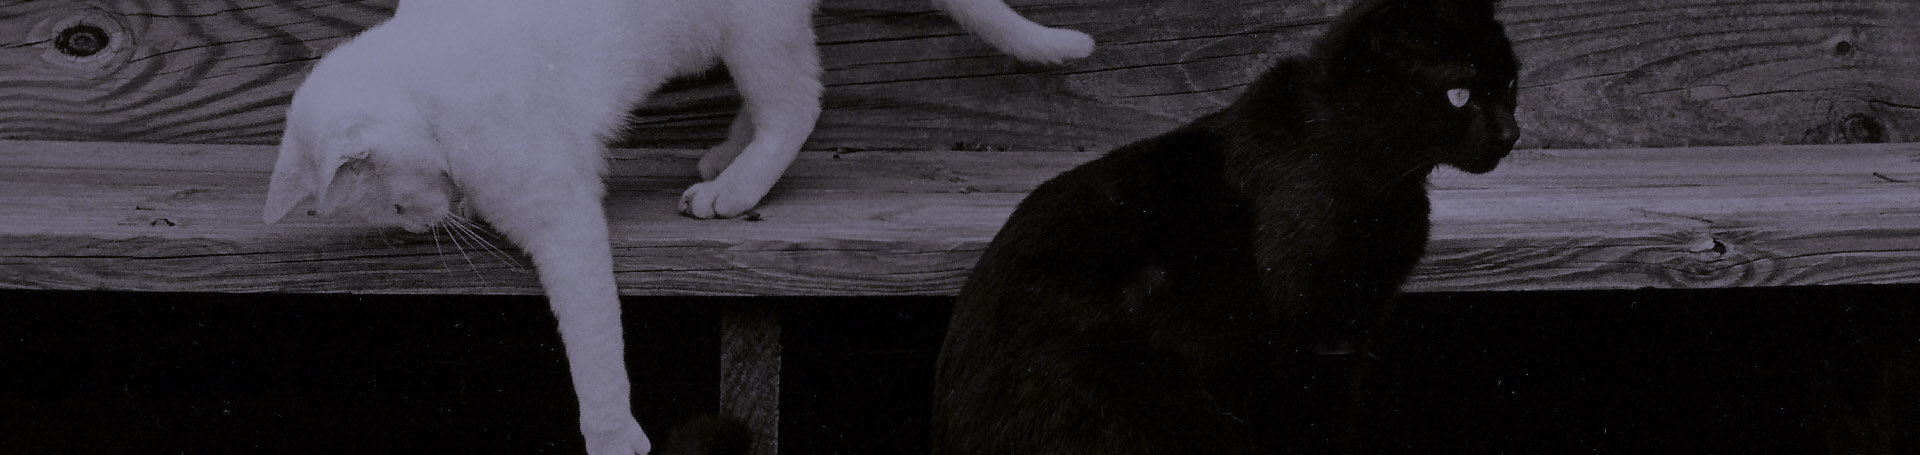 a black and white cat and a white cat on a wooden bench.